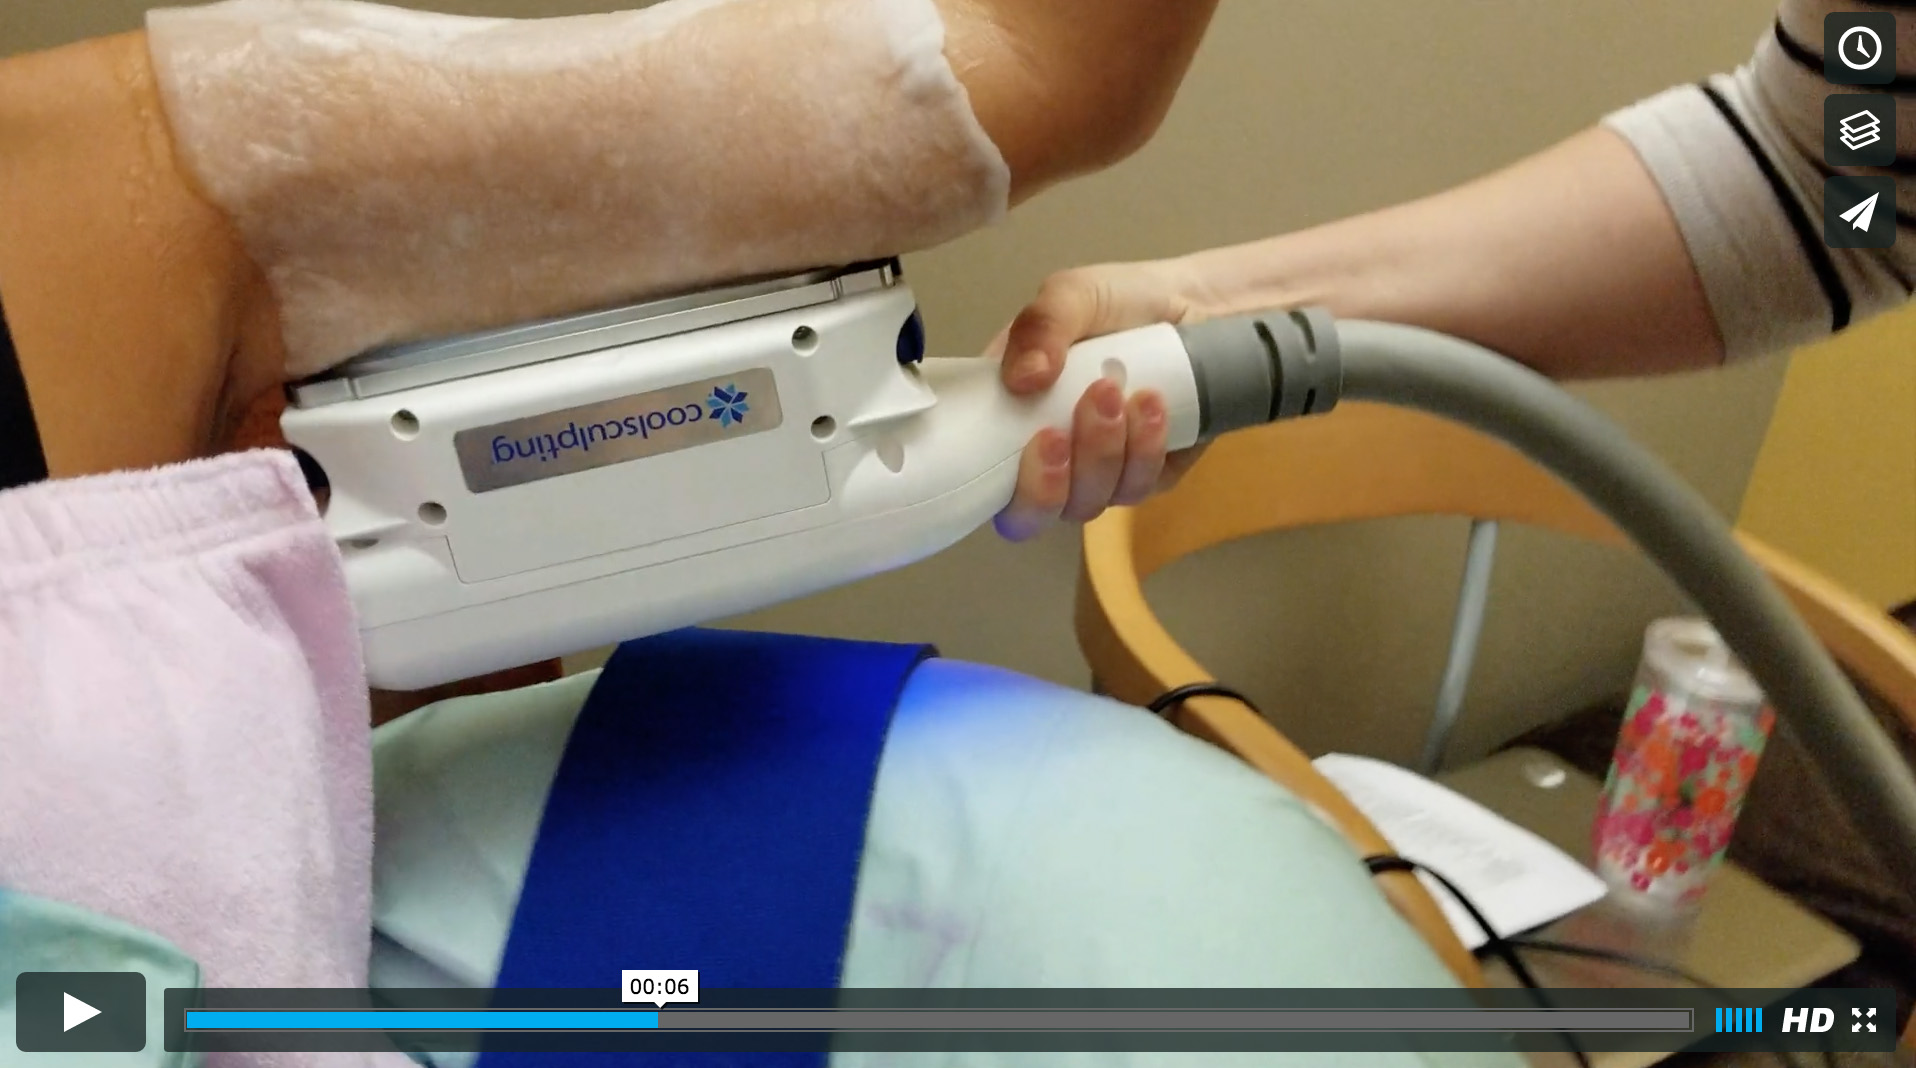 a patient undergoes coolsculpting for their underarm